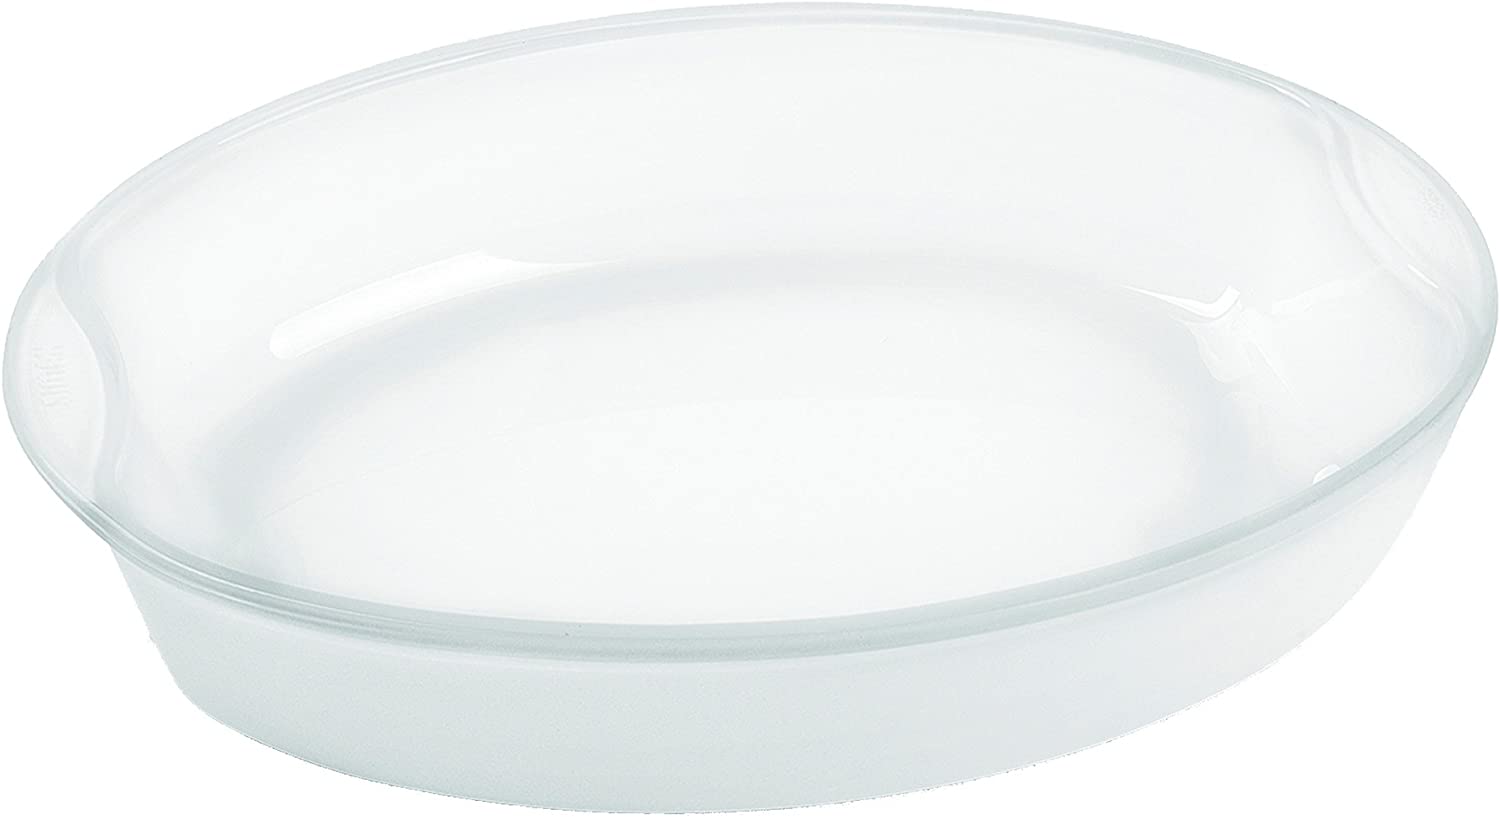 Bohemia Cristal Play of colors Cooking Frying and Baking Dish Oval 2.5 Litres of Heat Resistant Borosilicate Glass Baking Dish, 32 x 25 x 6.3 cm